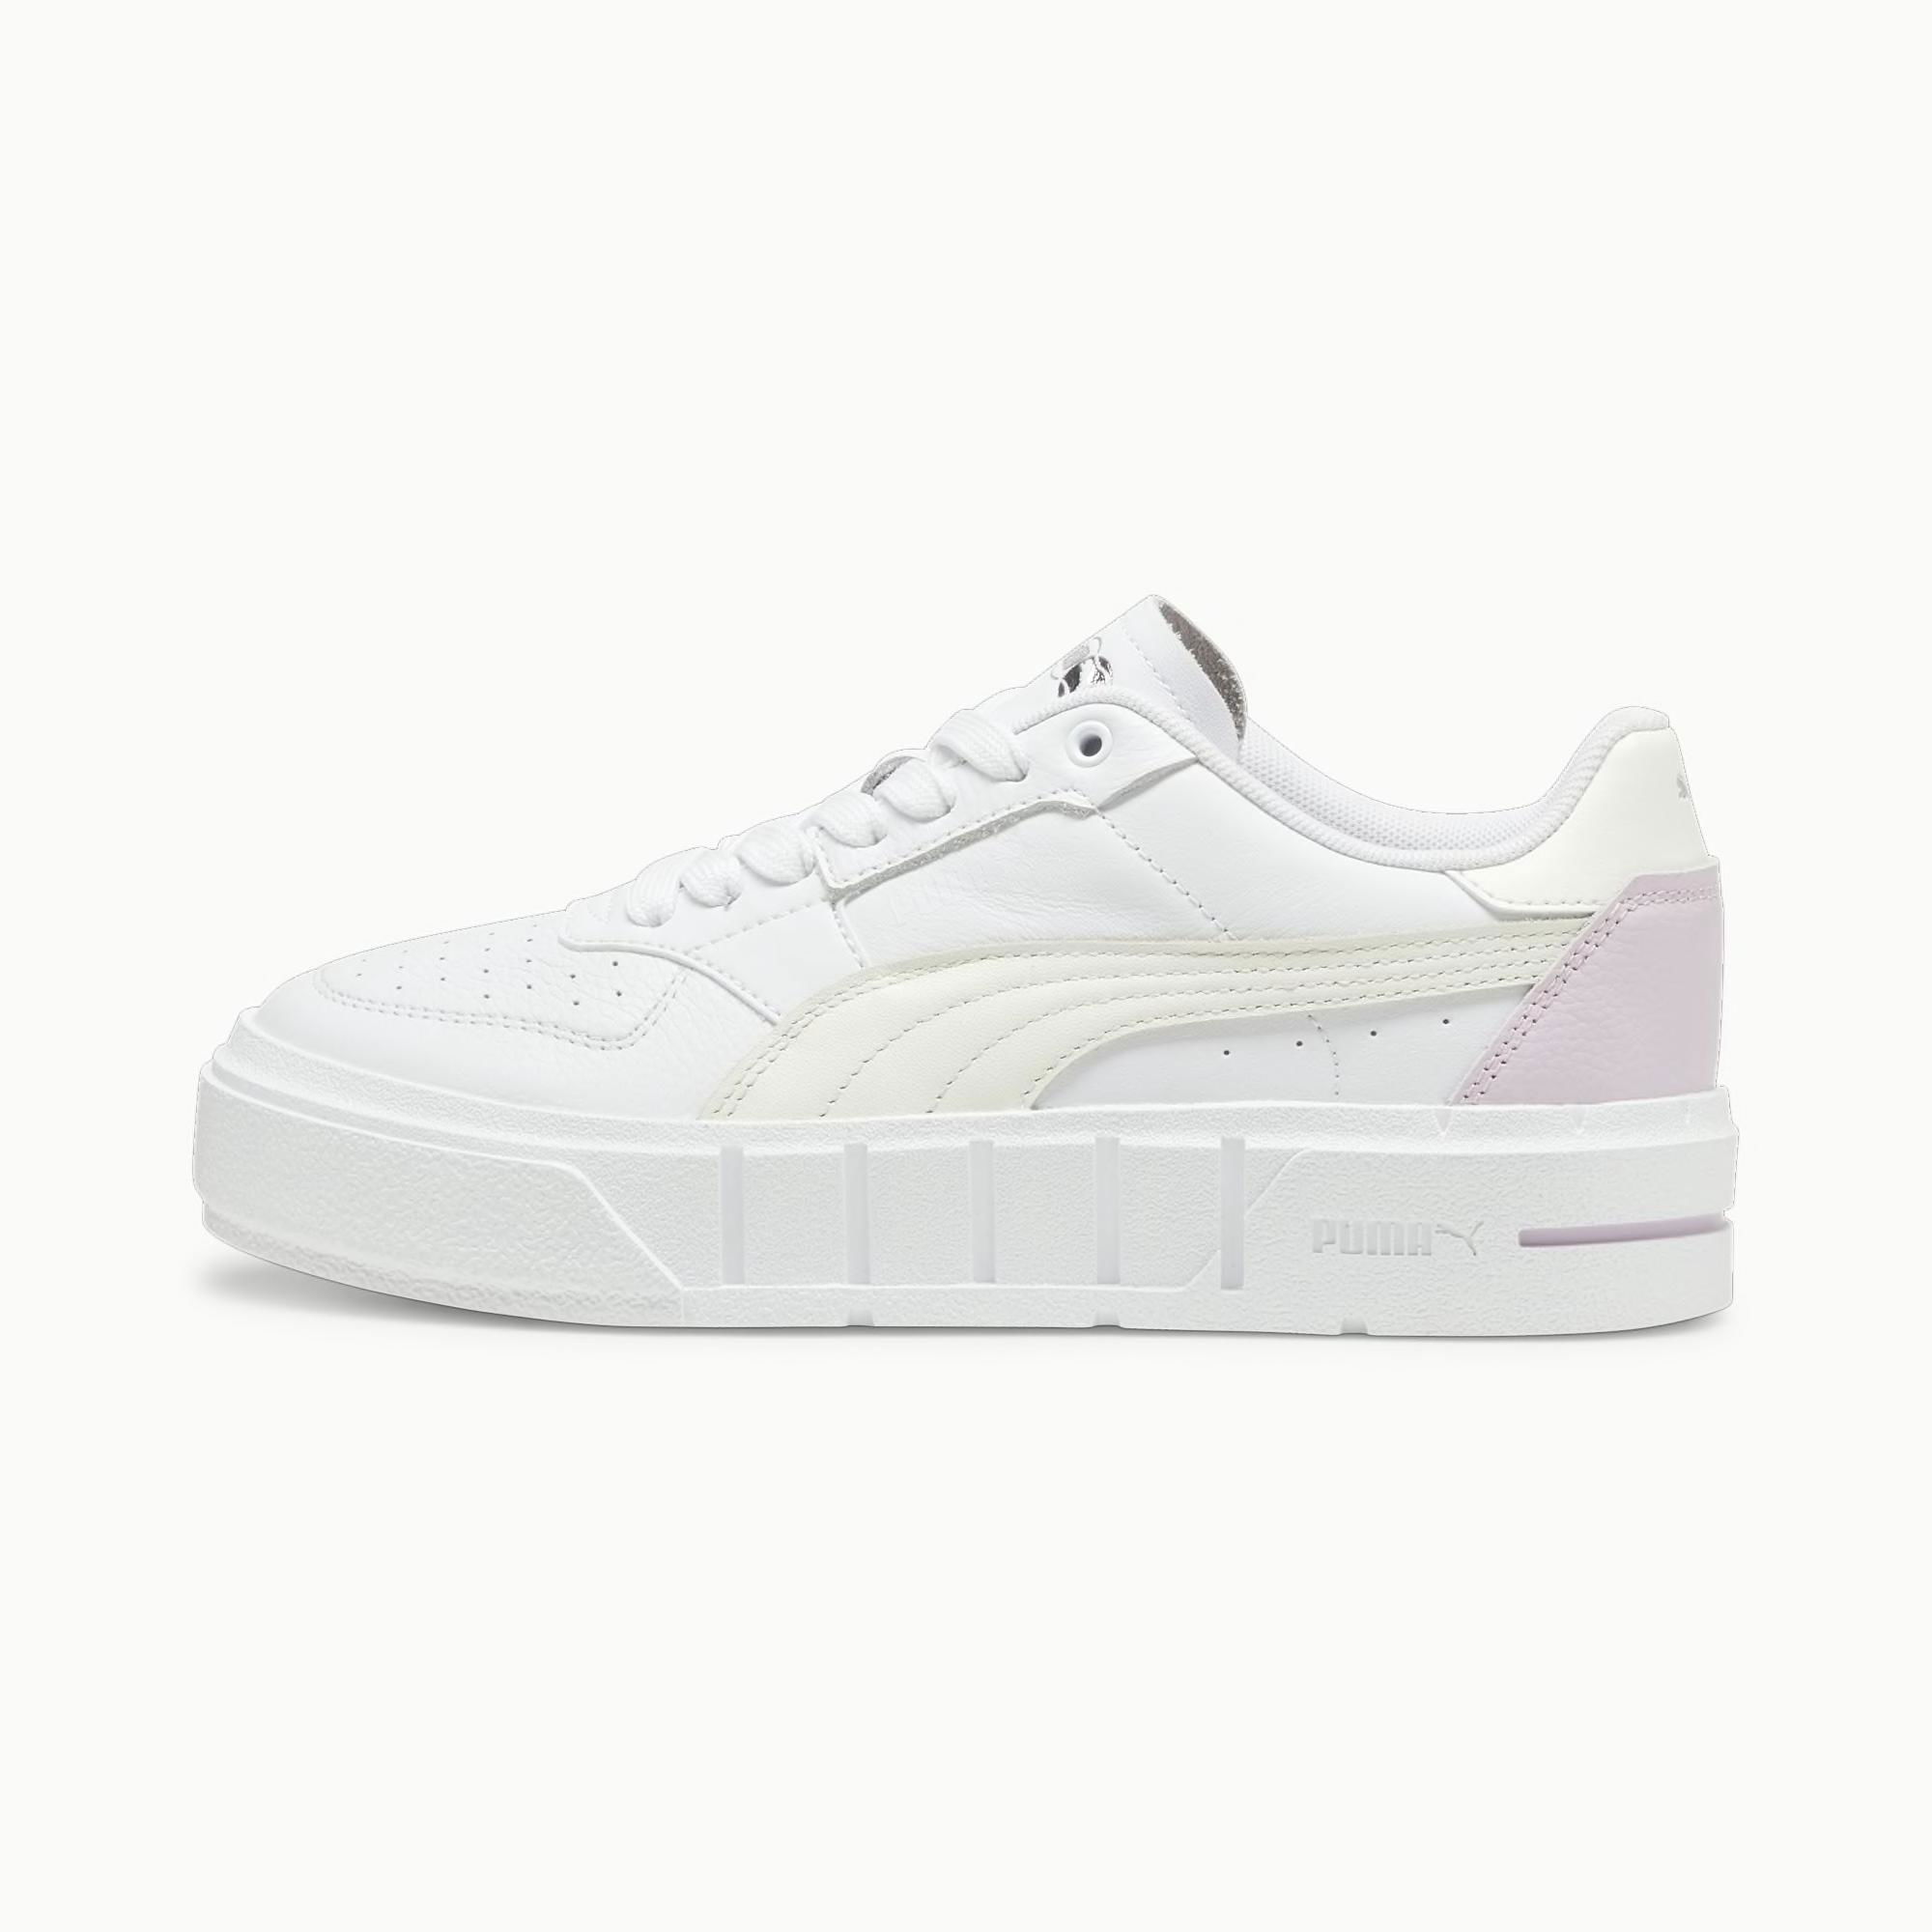 PUMA Cali Court Leather Women's Sneakers by PUMA